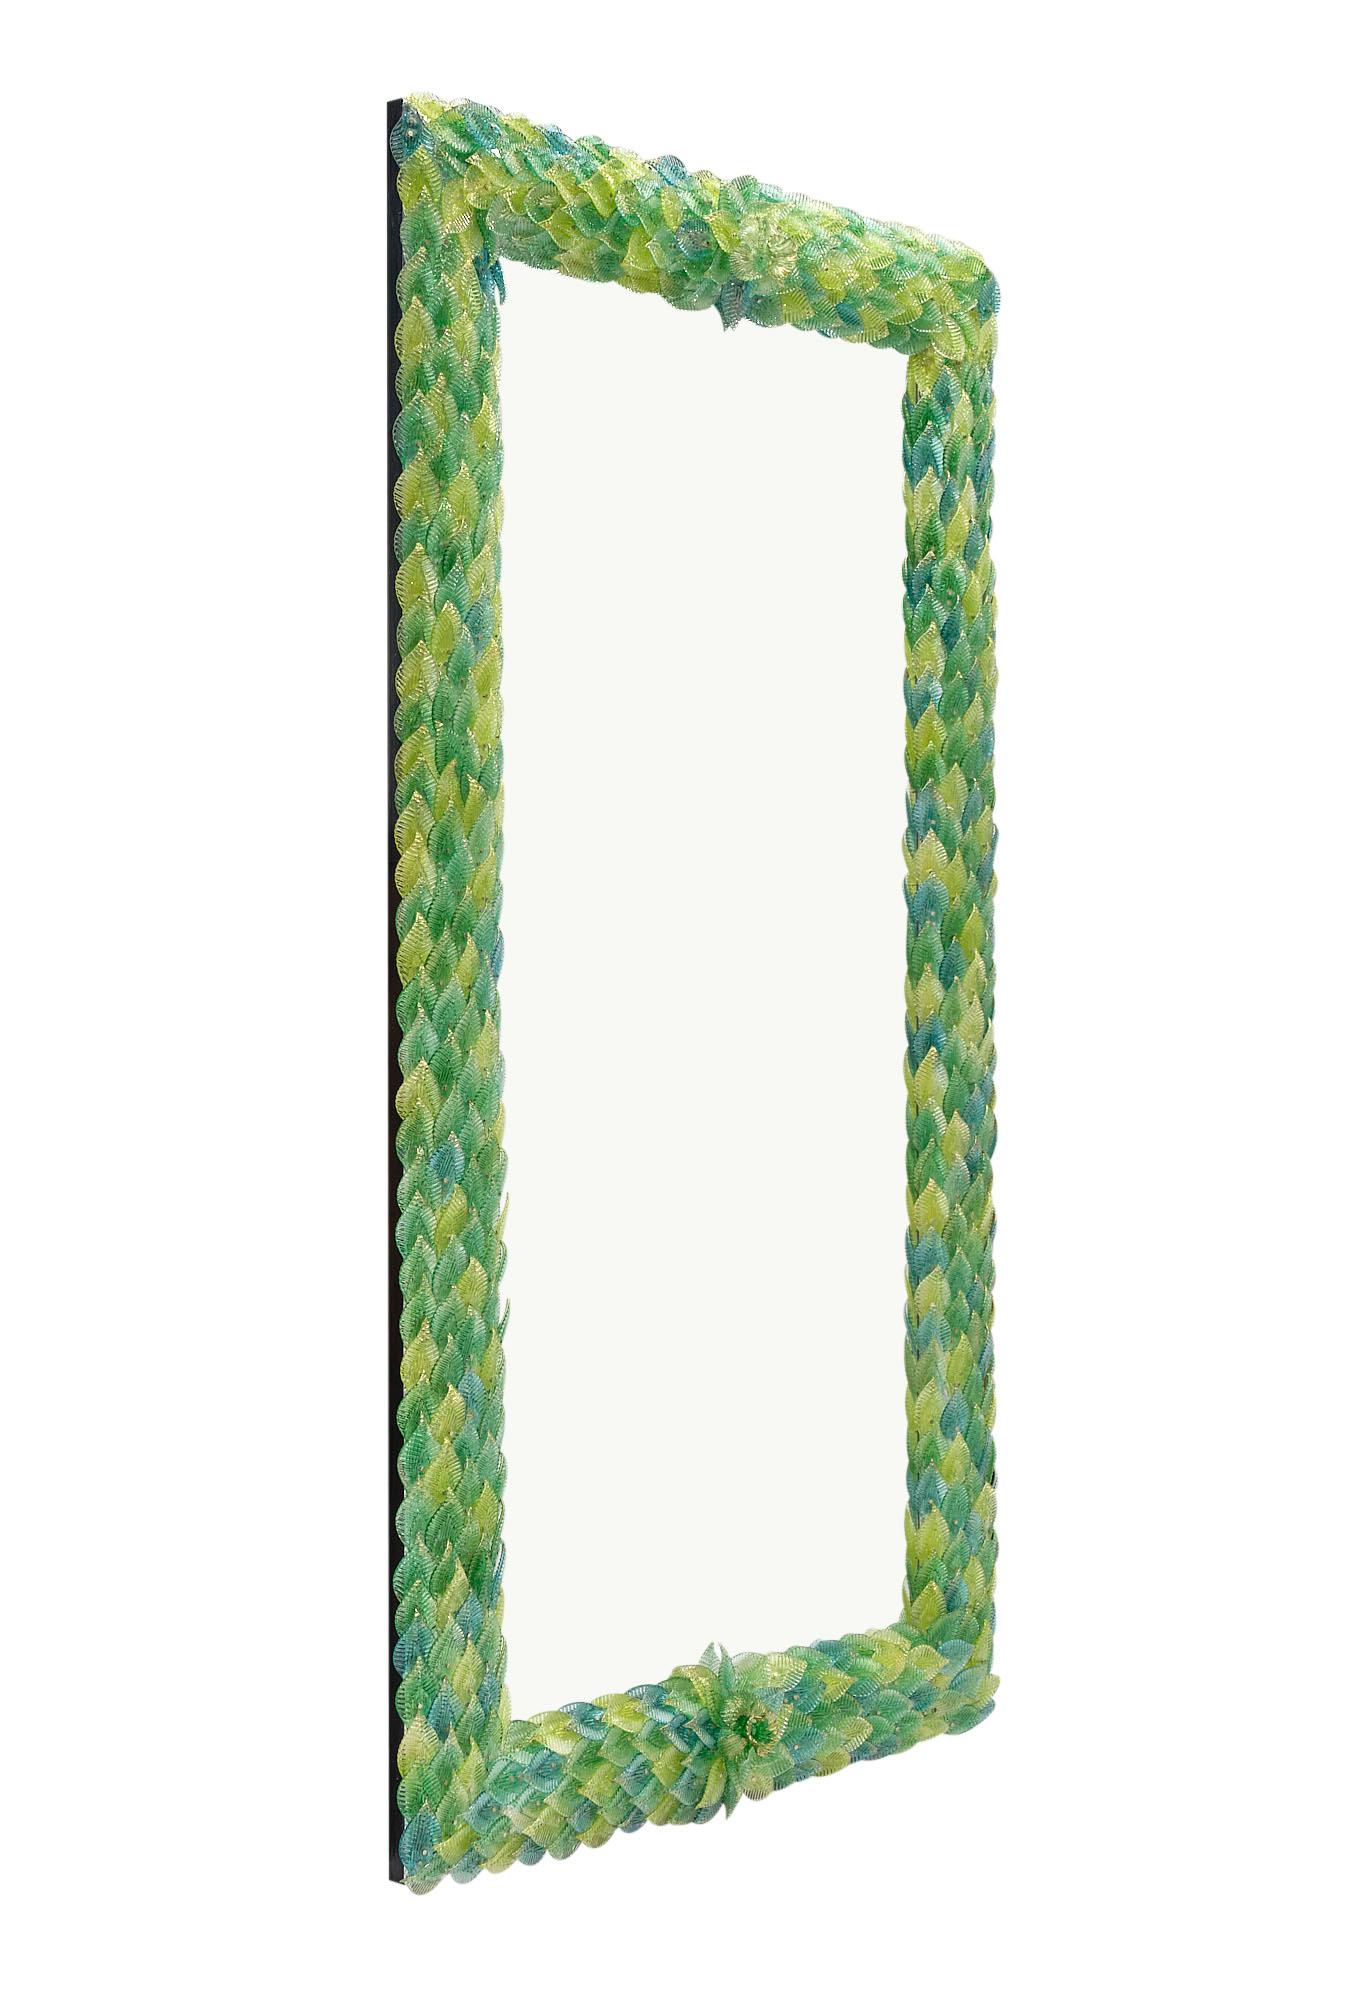 Mirror, Veneitan, from the island of Murano featuring a rich array of green and yellow hand-made glass leaves fused with 24 carat gold leafing.